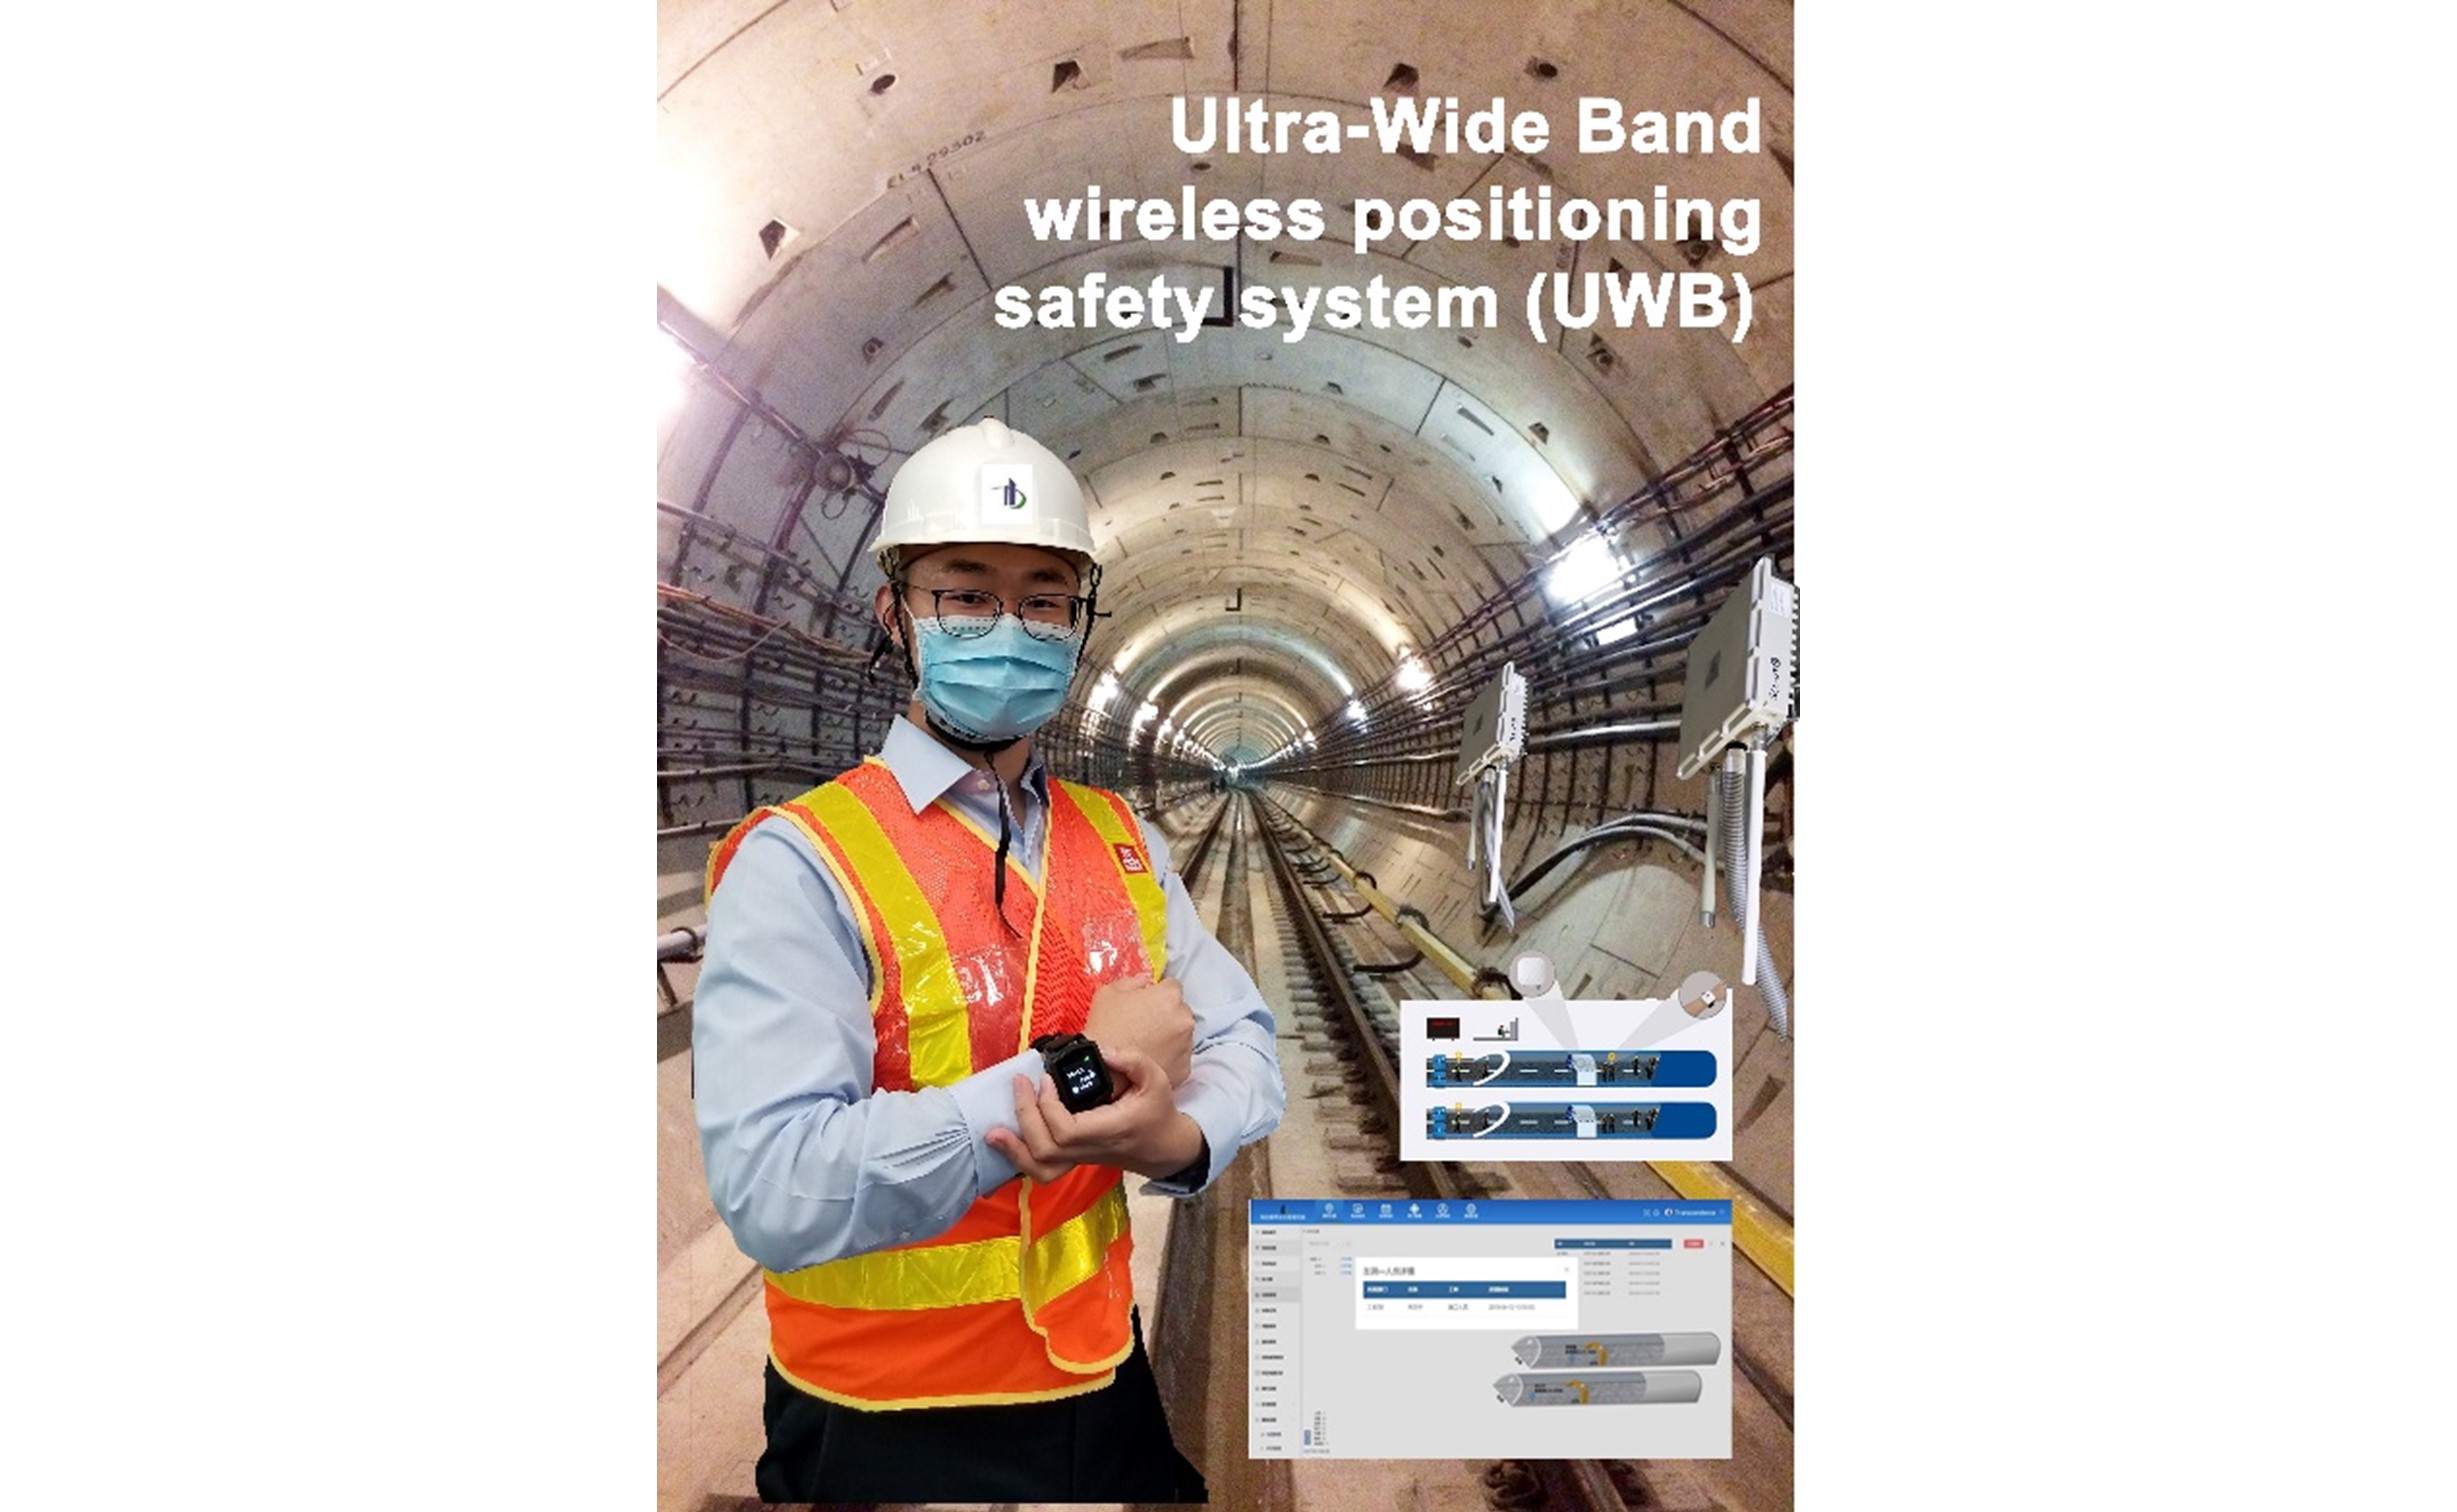 Ultra-wide Band Wireless Positioning Safety System